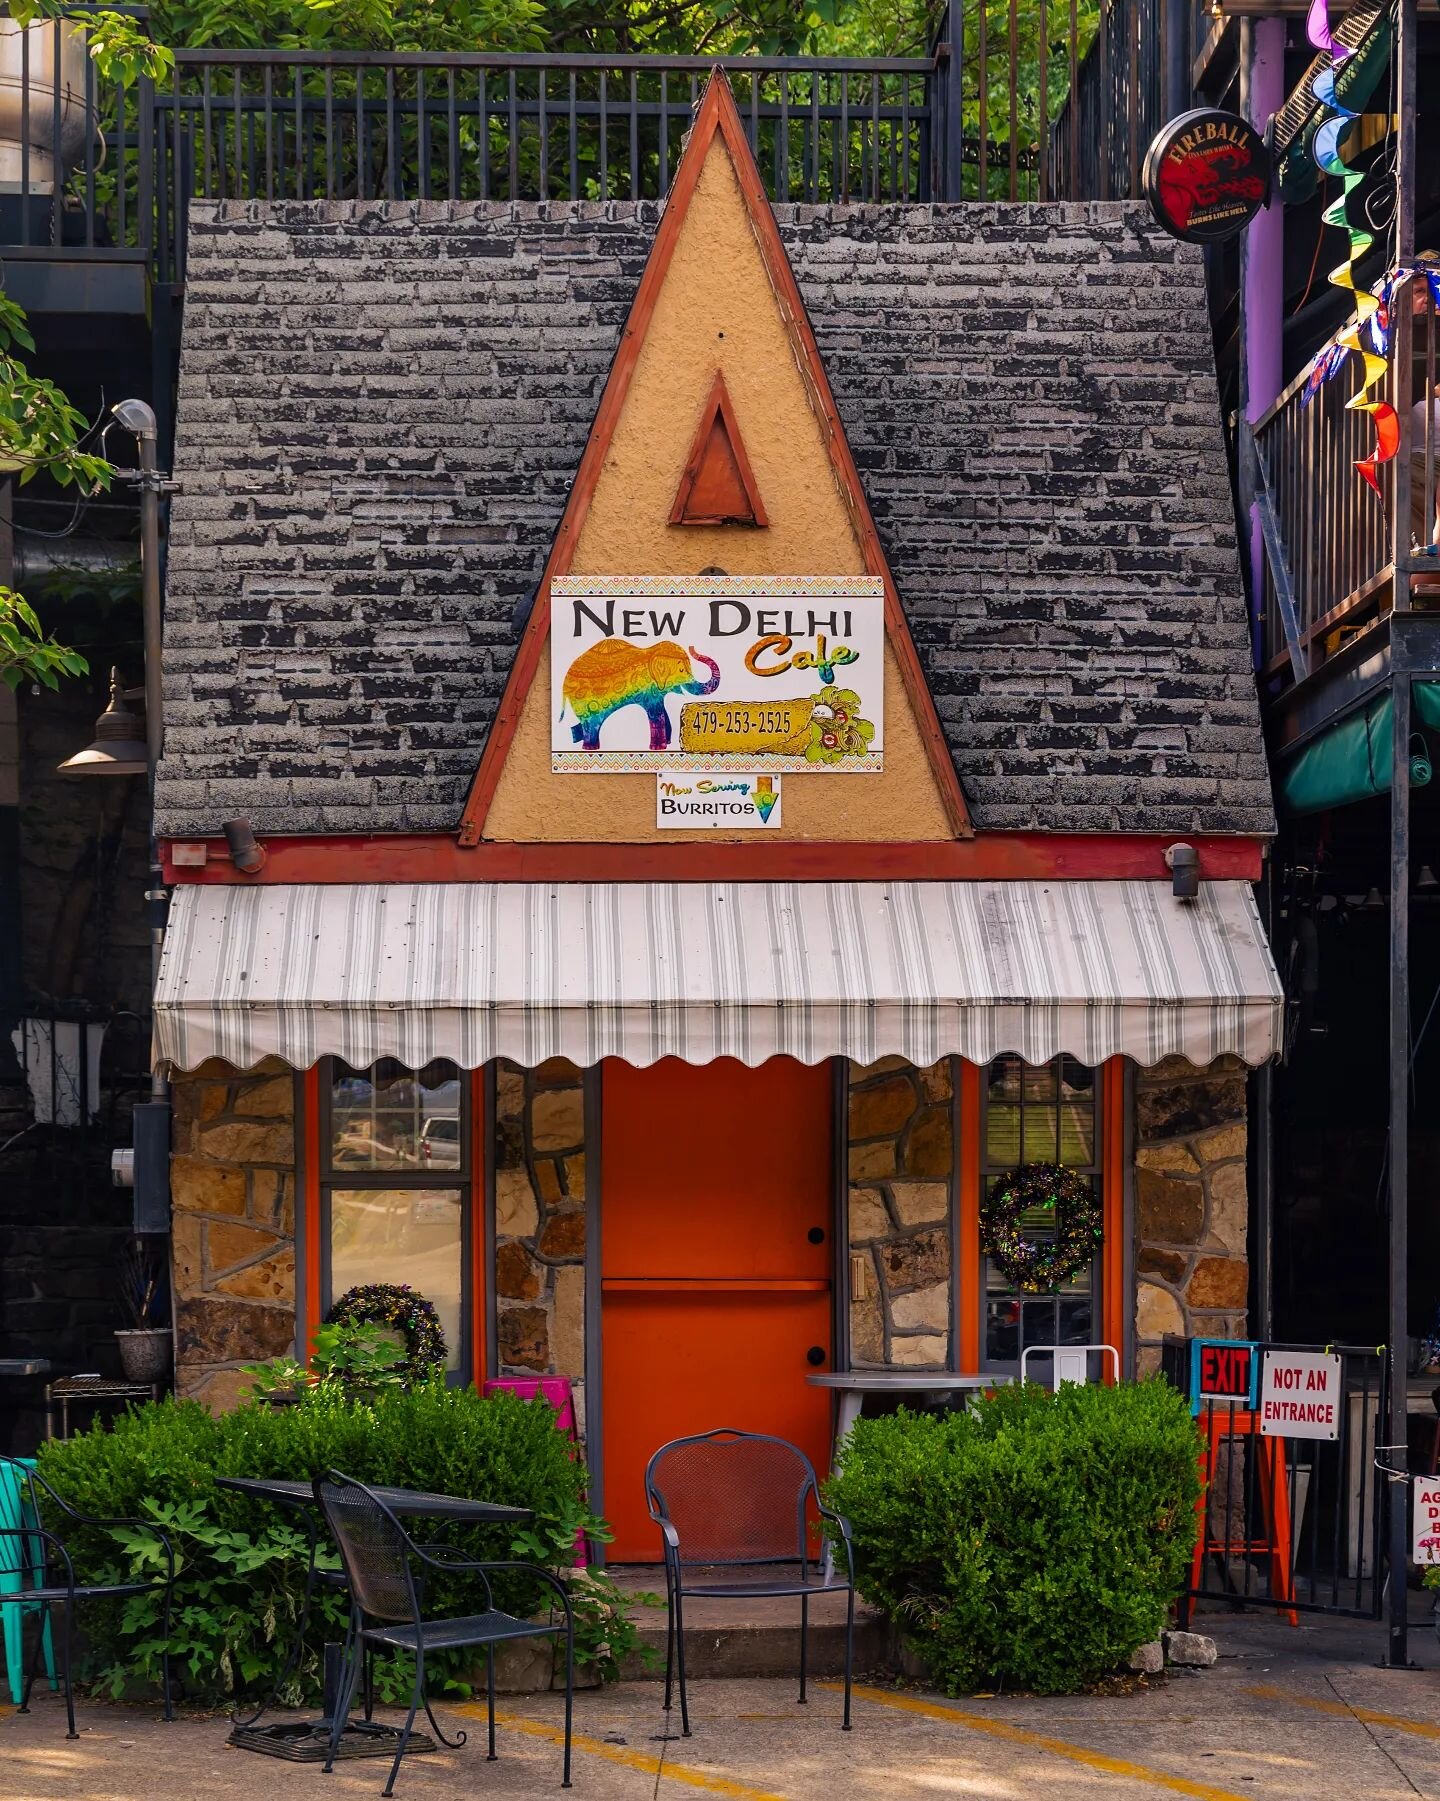 The food at the restaurant was just ok but the building is super cute 🏠 

This was a quick stop, definitely want to go back in town to check out more of the unique buildings!

📍 Eureka Springs, Arkansas